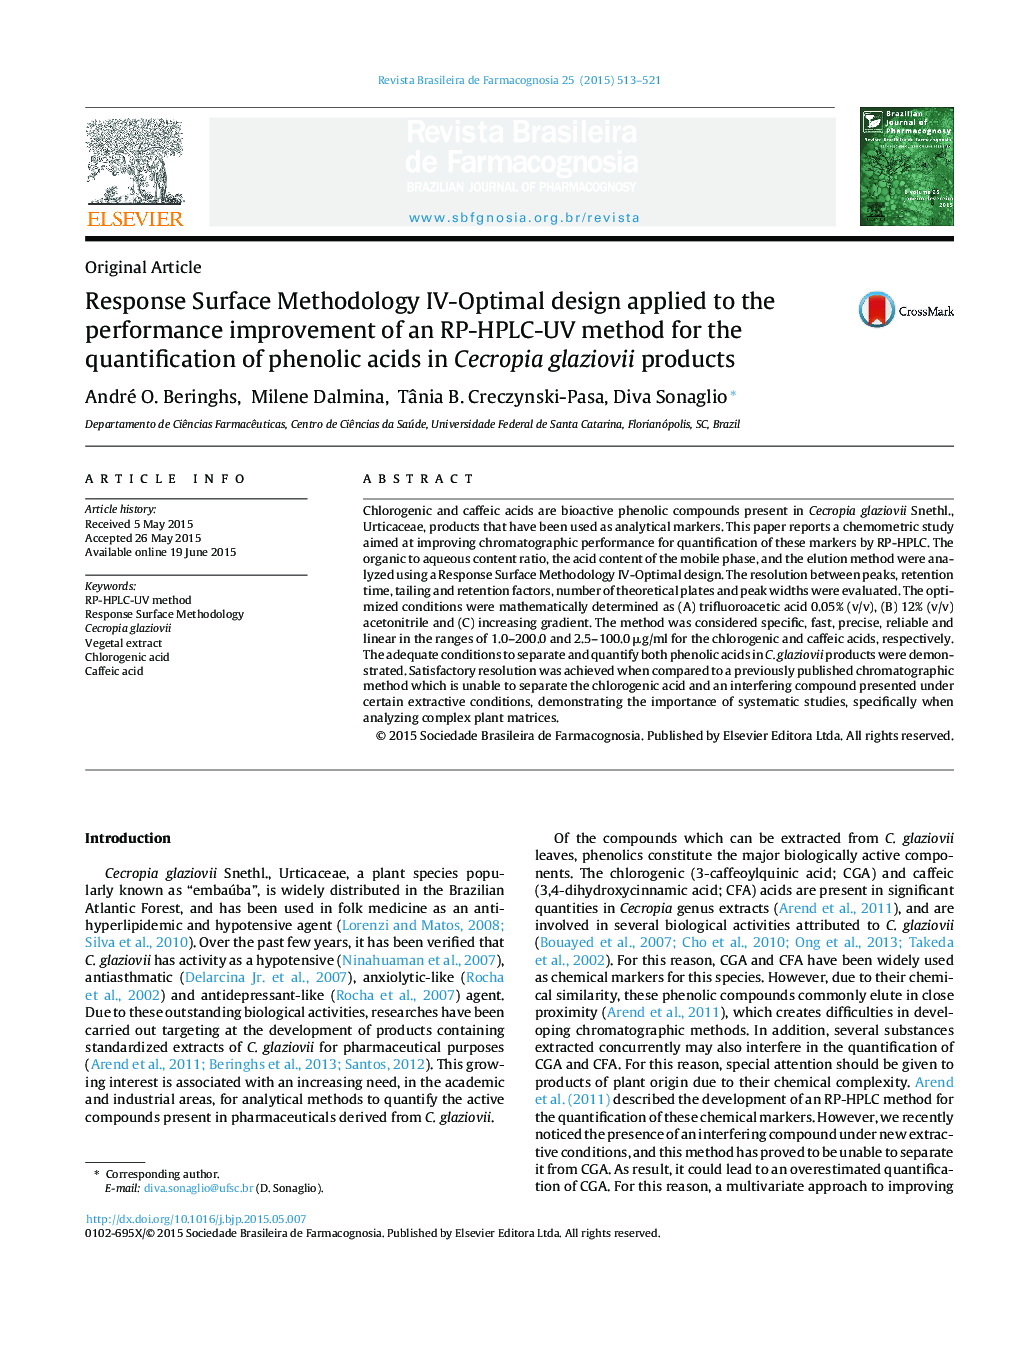 Response Surface Methodology IV-Optimal design applied to the performance improvement of an RP-HPLC-UV method for the quantification of phenolic acids in Cecropia glaziovii products